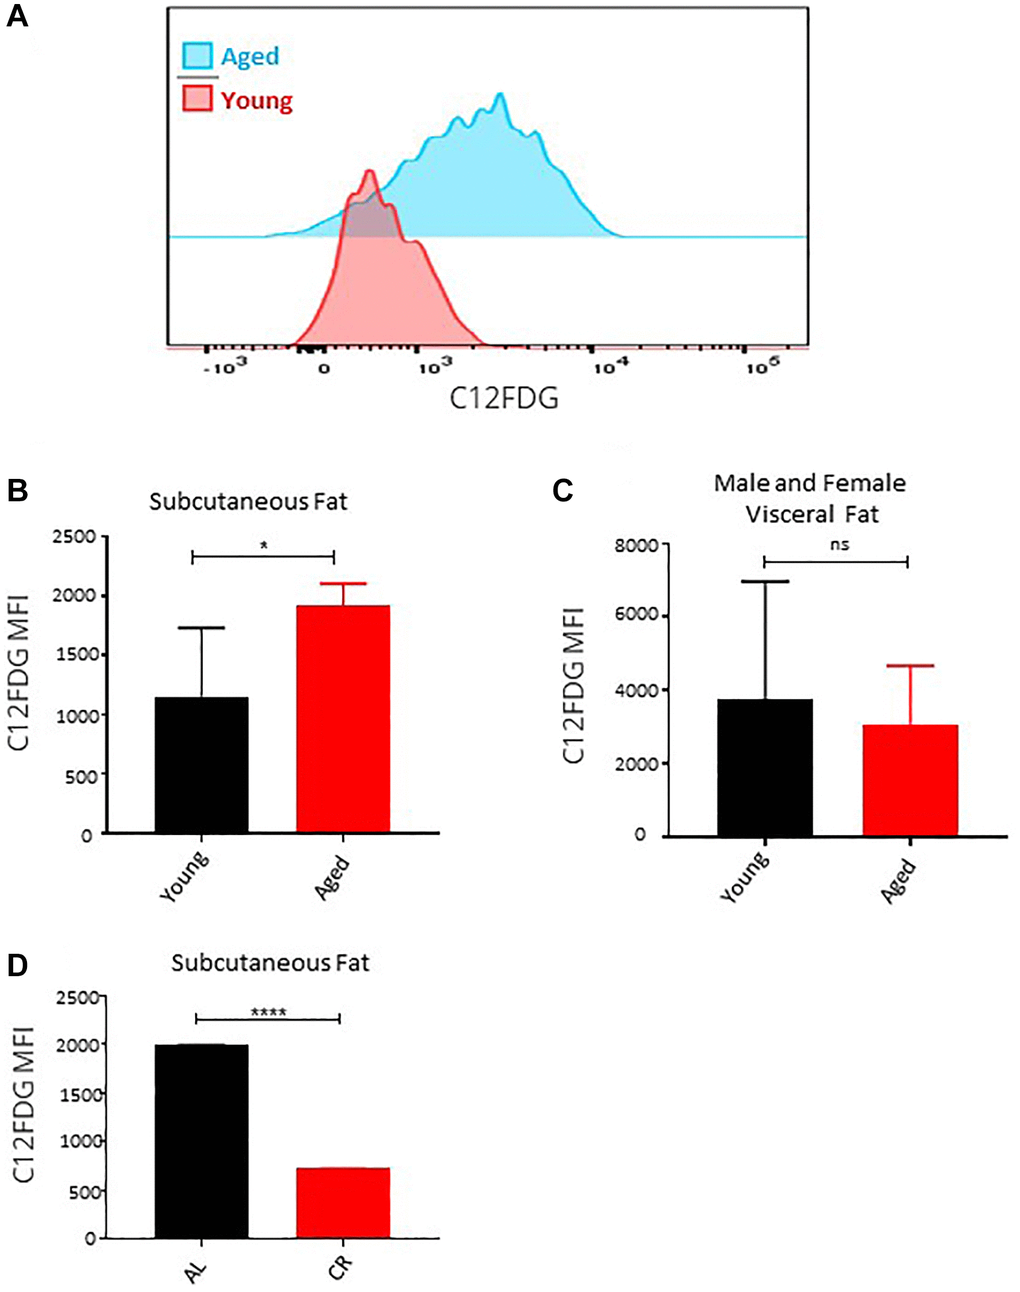 Effect of age on senescence in ASCs. (A) Representative histogram of senescence marker C12FDG fluorescence among ASCs from young and aged mice. (B, C) The mean fluorescence intensity distribution of C12FDG in subcutaneous (B) and visceral (C) ASCs from young and aged mice. Graphs are representative of eight mice per group and ASCs from two mice were pooled together to achieve 5000 events count. (D) The mean fluorescence intensity distribution of C12FDG in subcutaneous ASCs from mice fed on caloric restricted and ad-libitum diet. (n= 3–5 mice per group) P value *, ****, ns = non-significant.